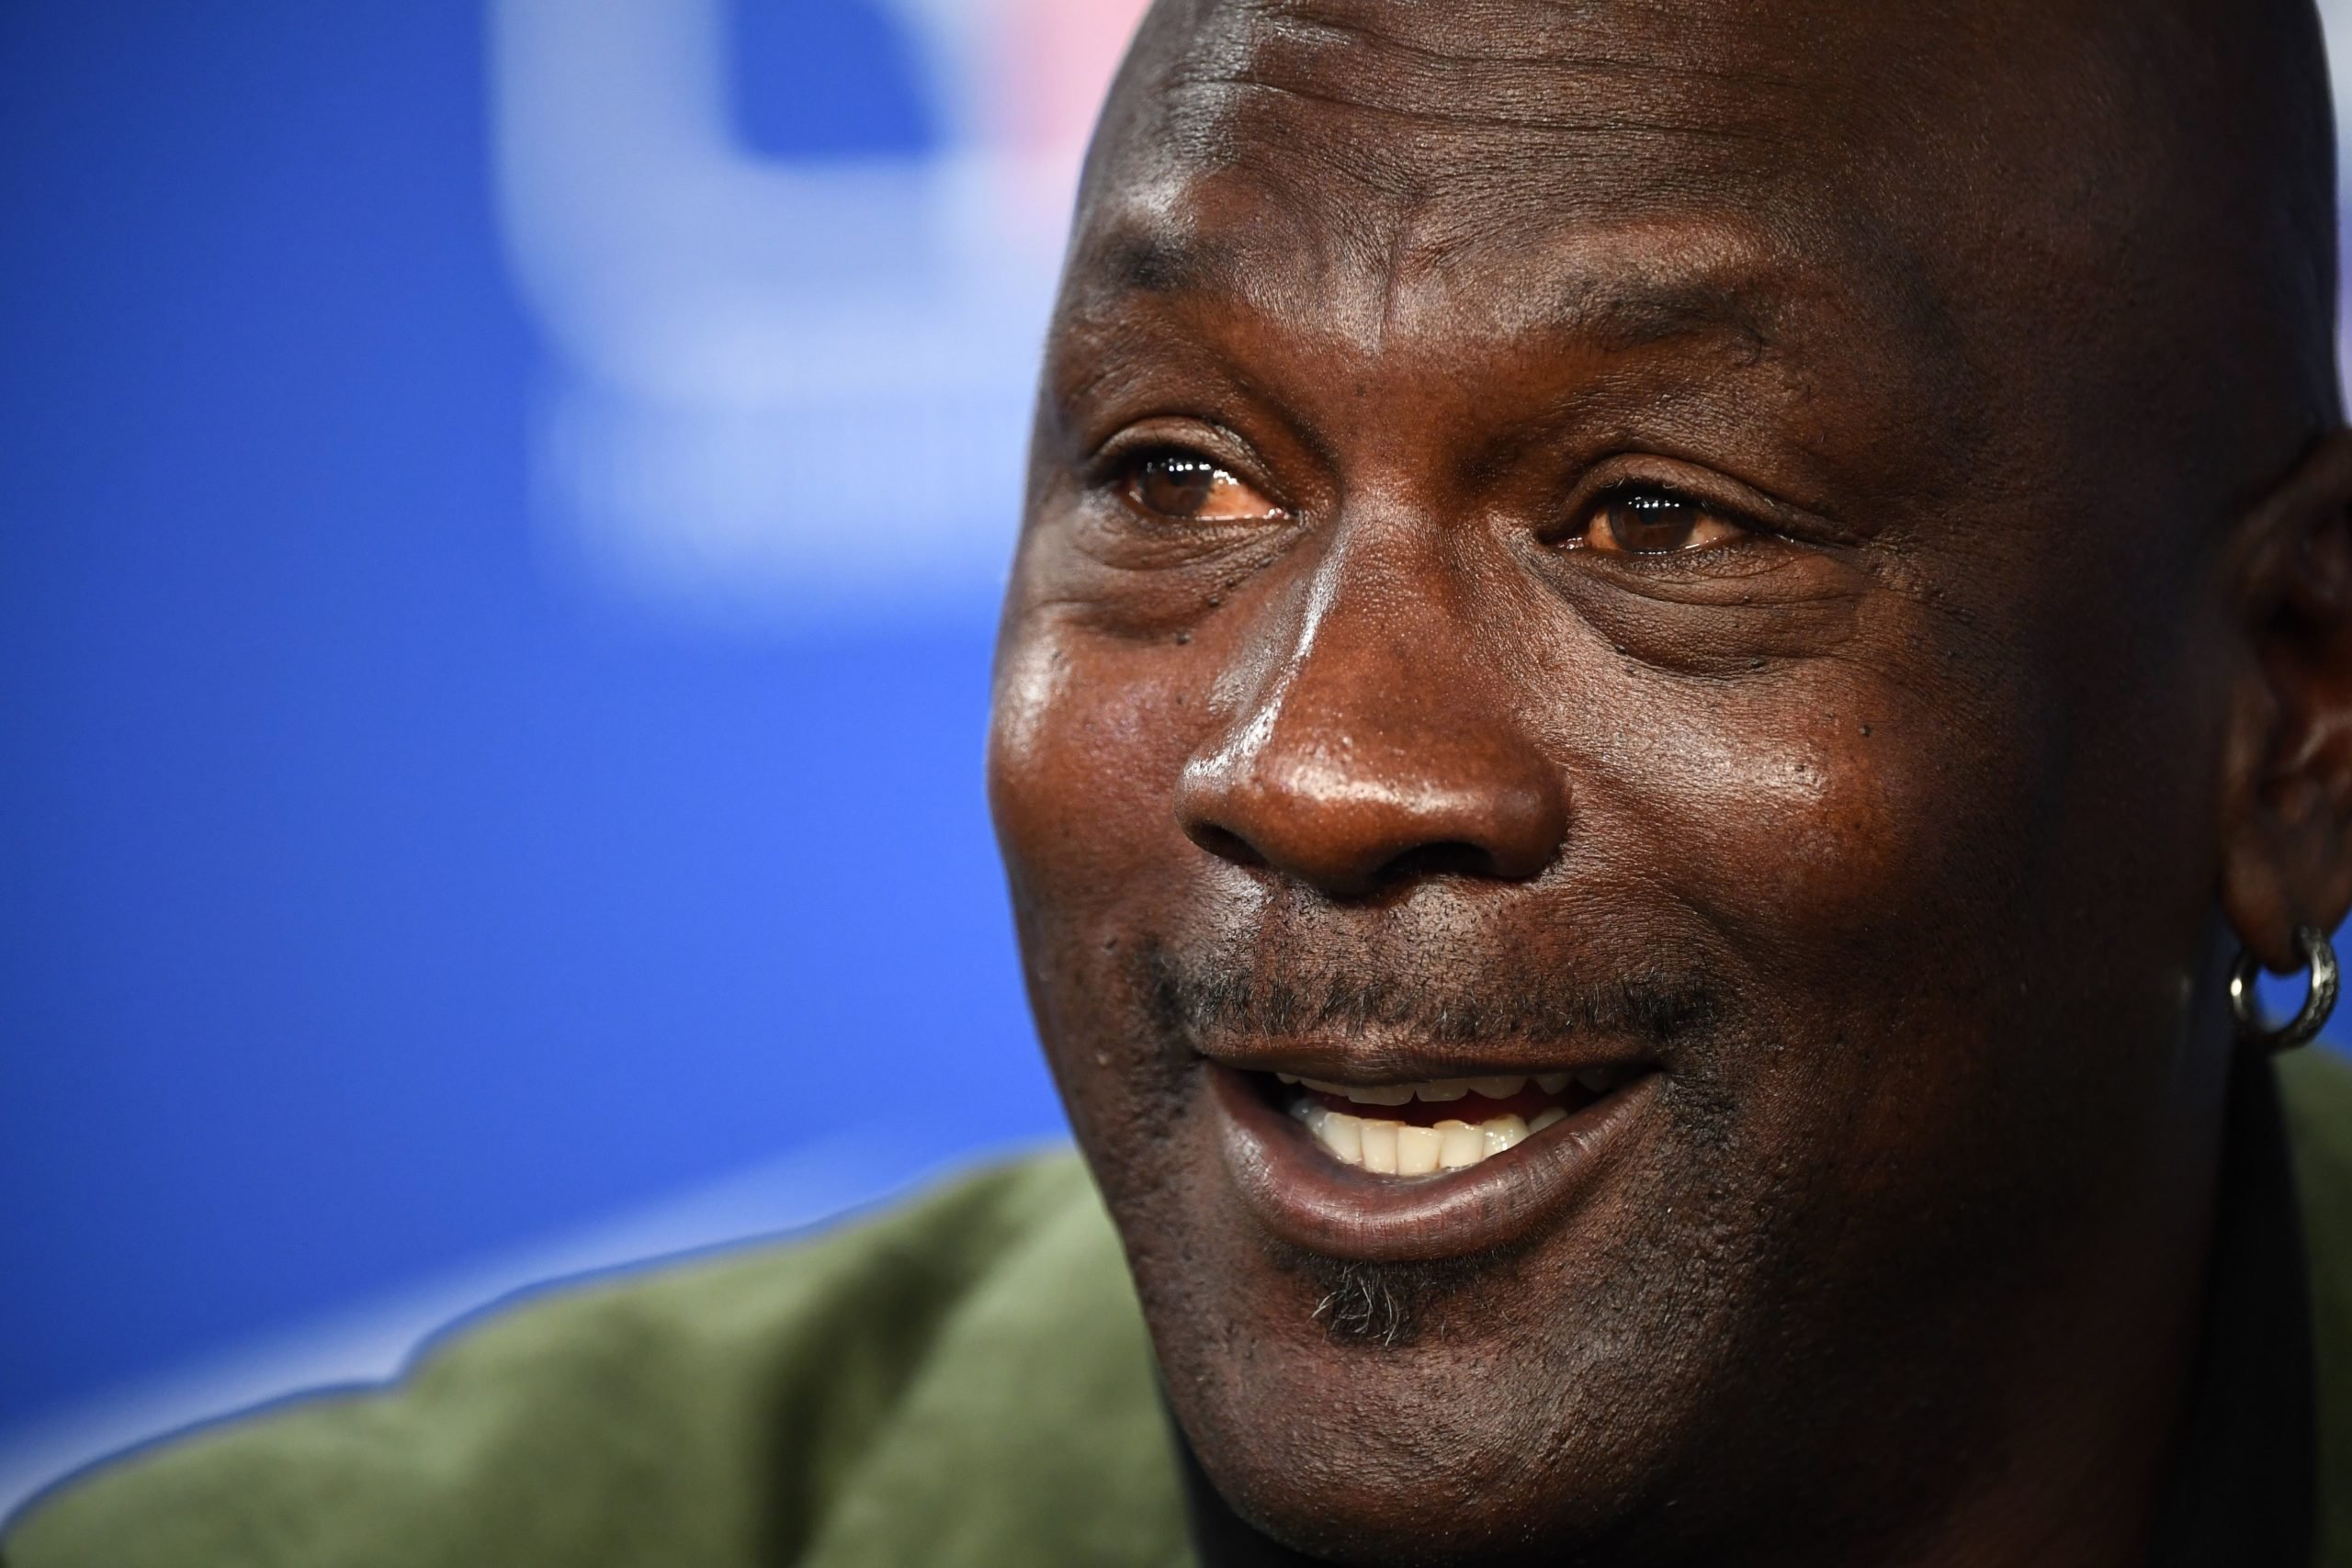 Michael Jordan addresses a press conference ahead of the NBA basketball match between Milwaukee Bucks and Charlotte Hornets at The AccorHotels Arena in Paris on January 24, 2020. (Photo by FRANCK FIFE/AFP via Getty Images)